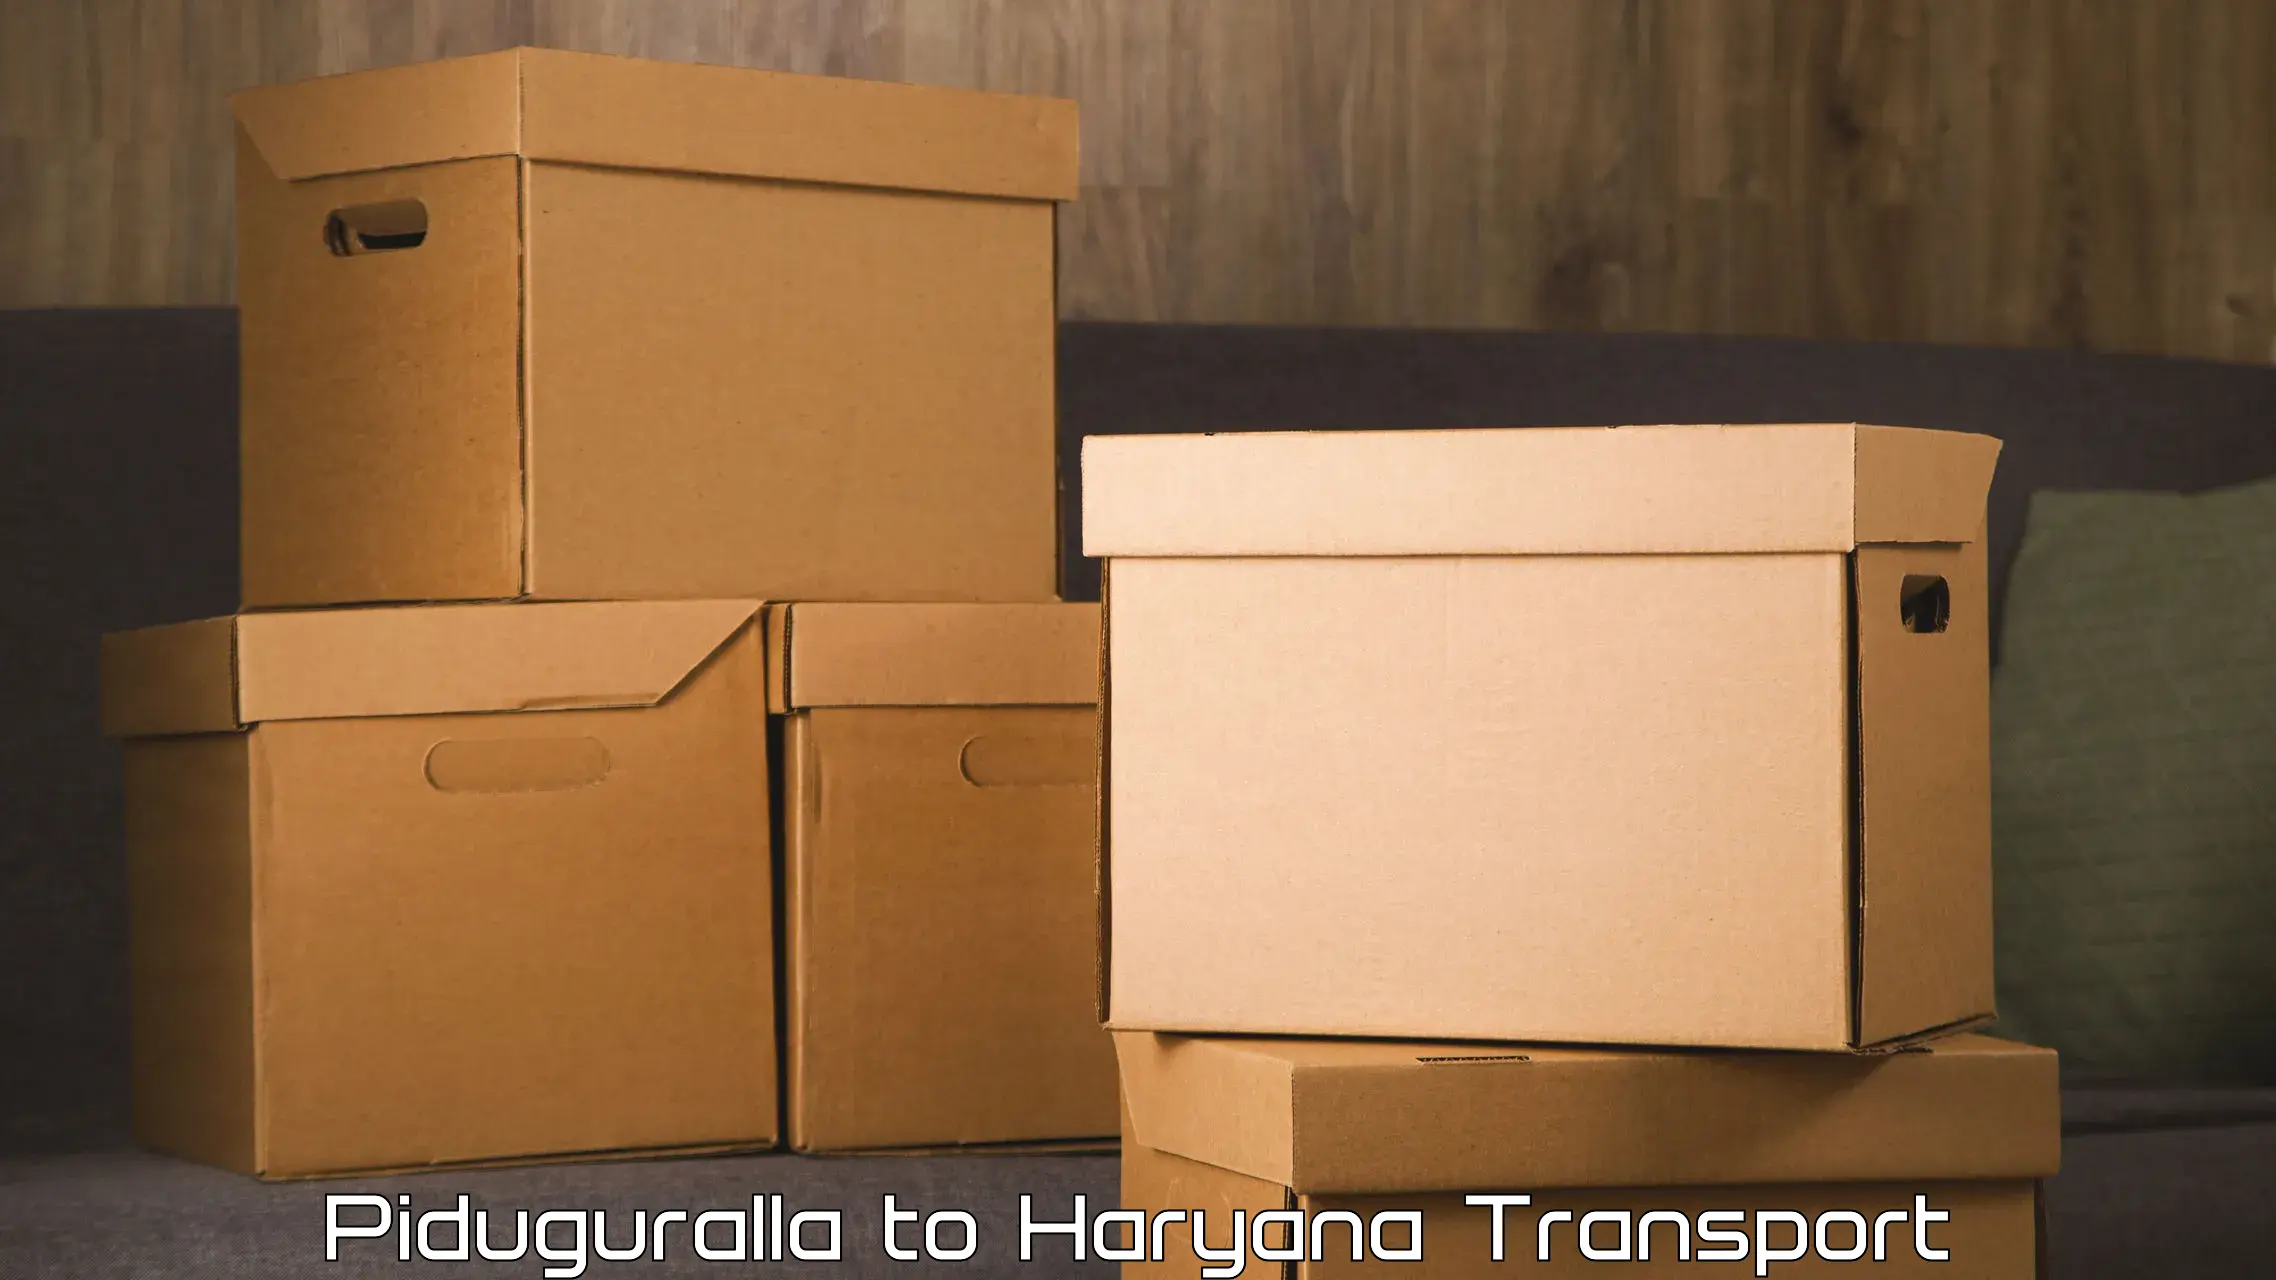 Best transport services in India Piduguralla to Sirsa